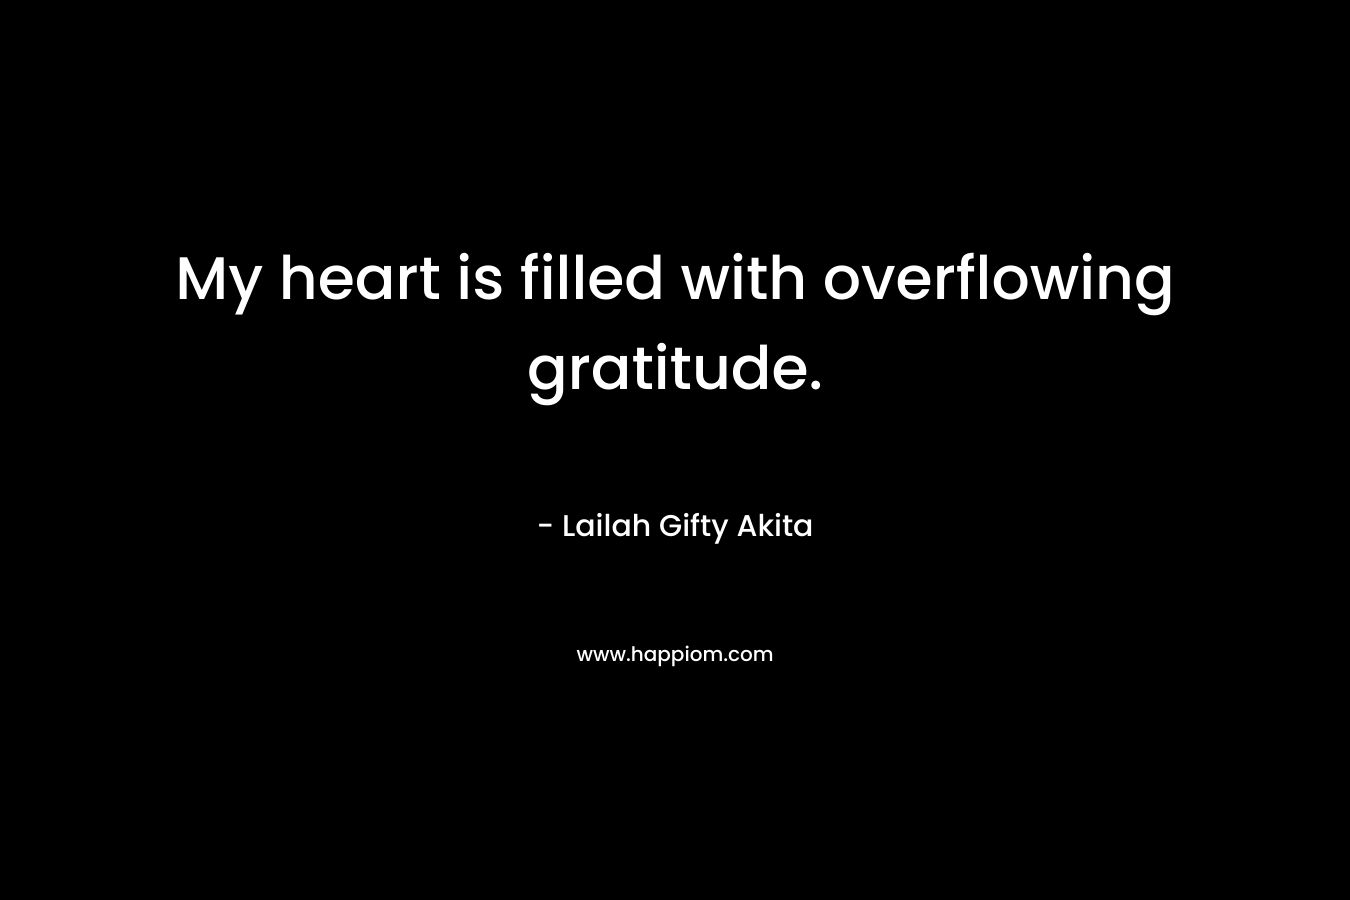 My heart is filled with overflowing gratitude.